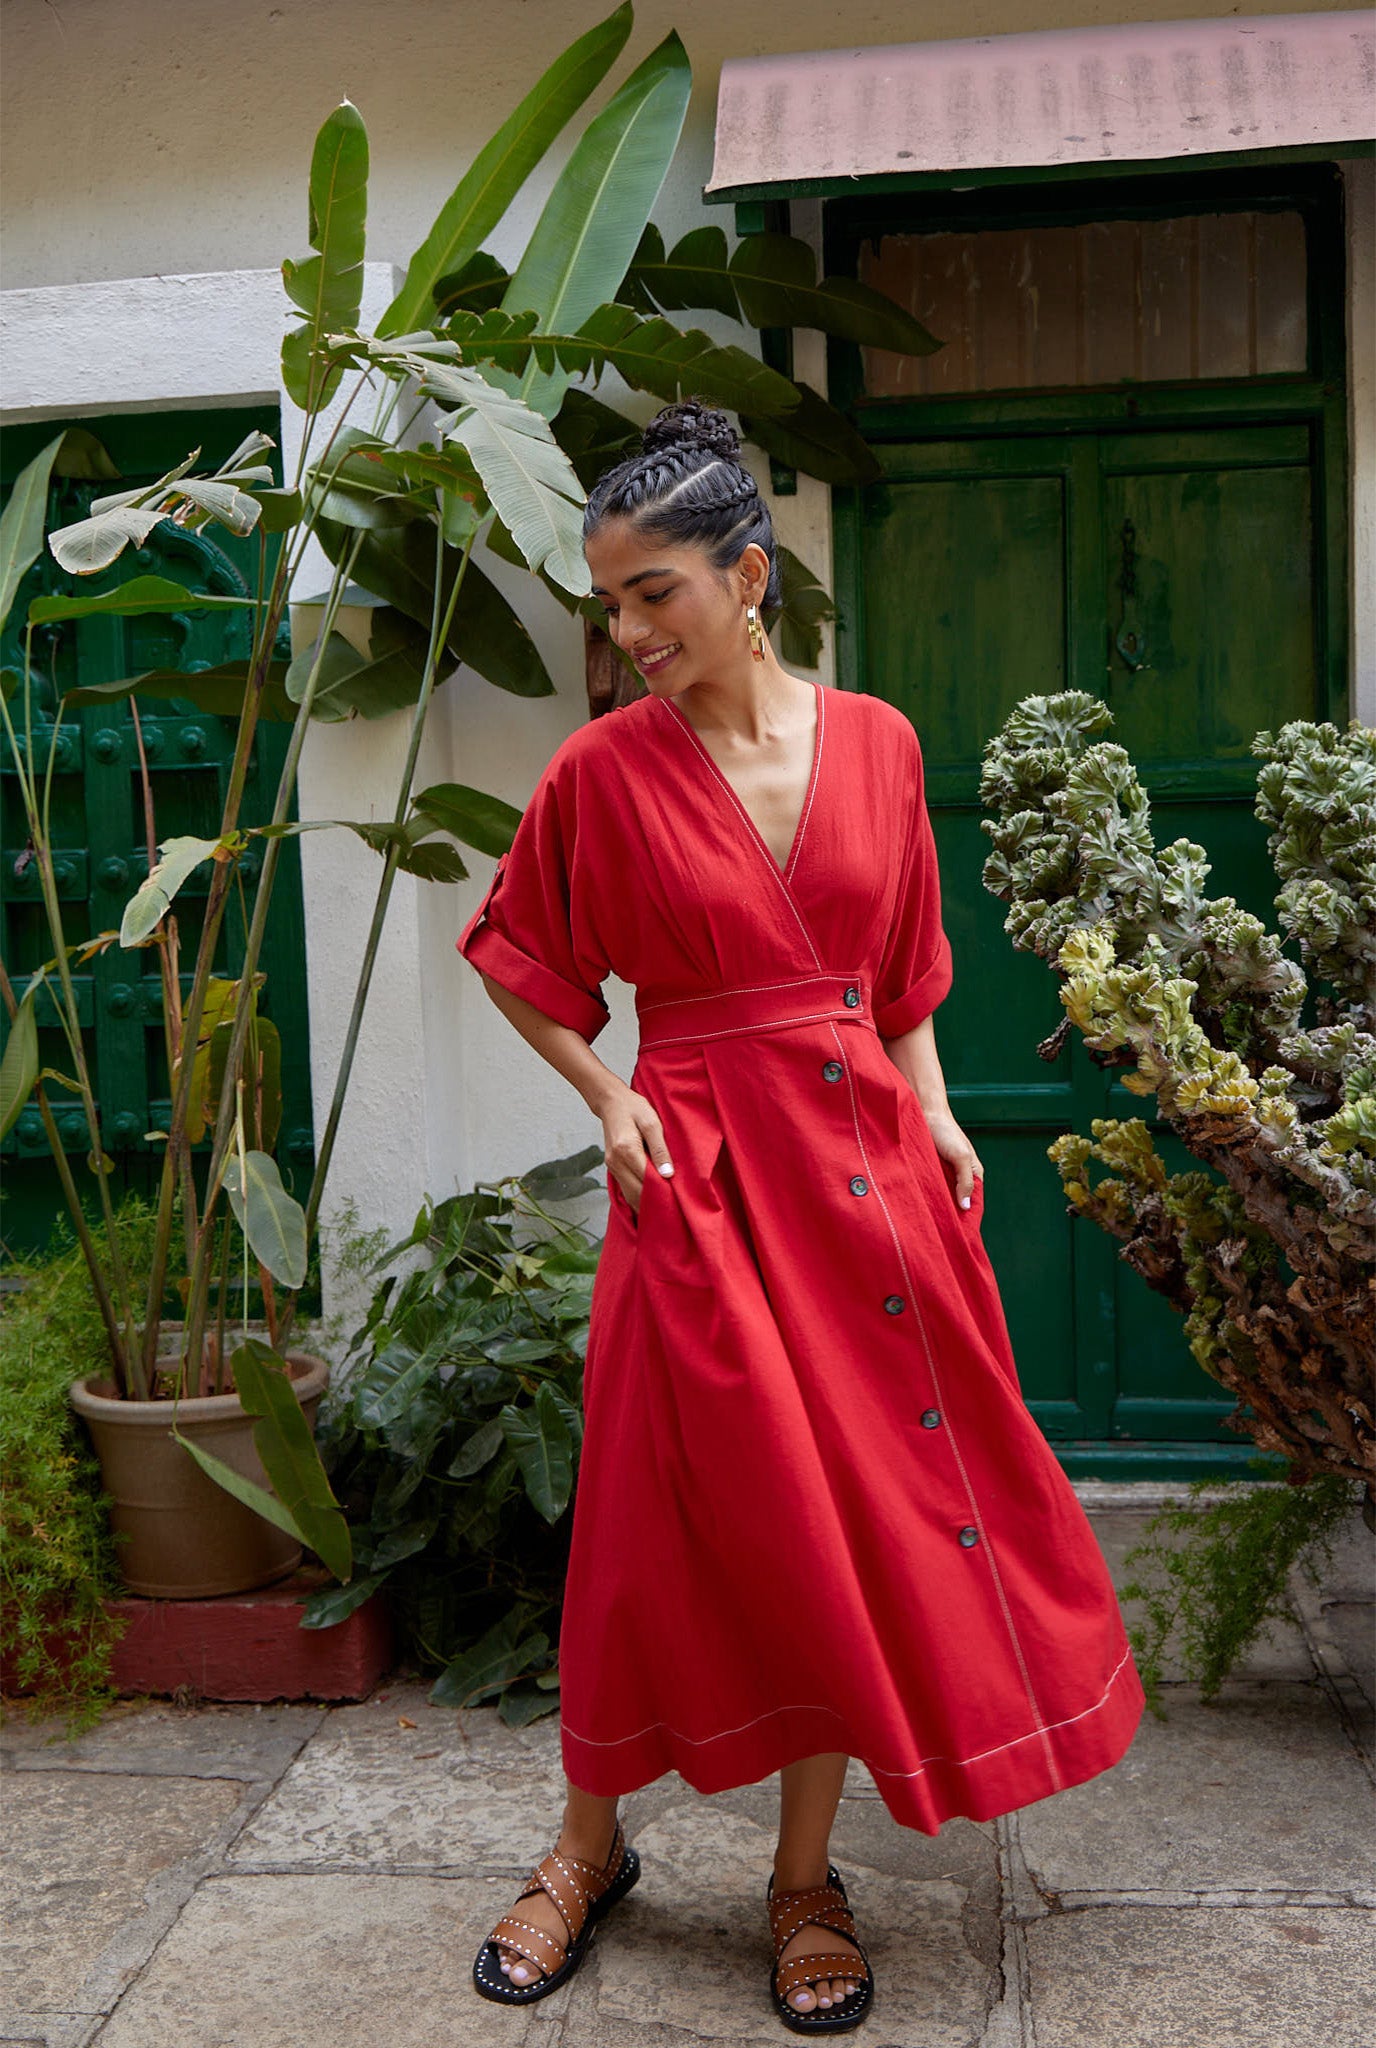 the-jodi-life-cotton-red-dress-crafted-by-artisans